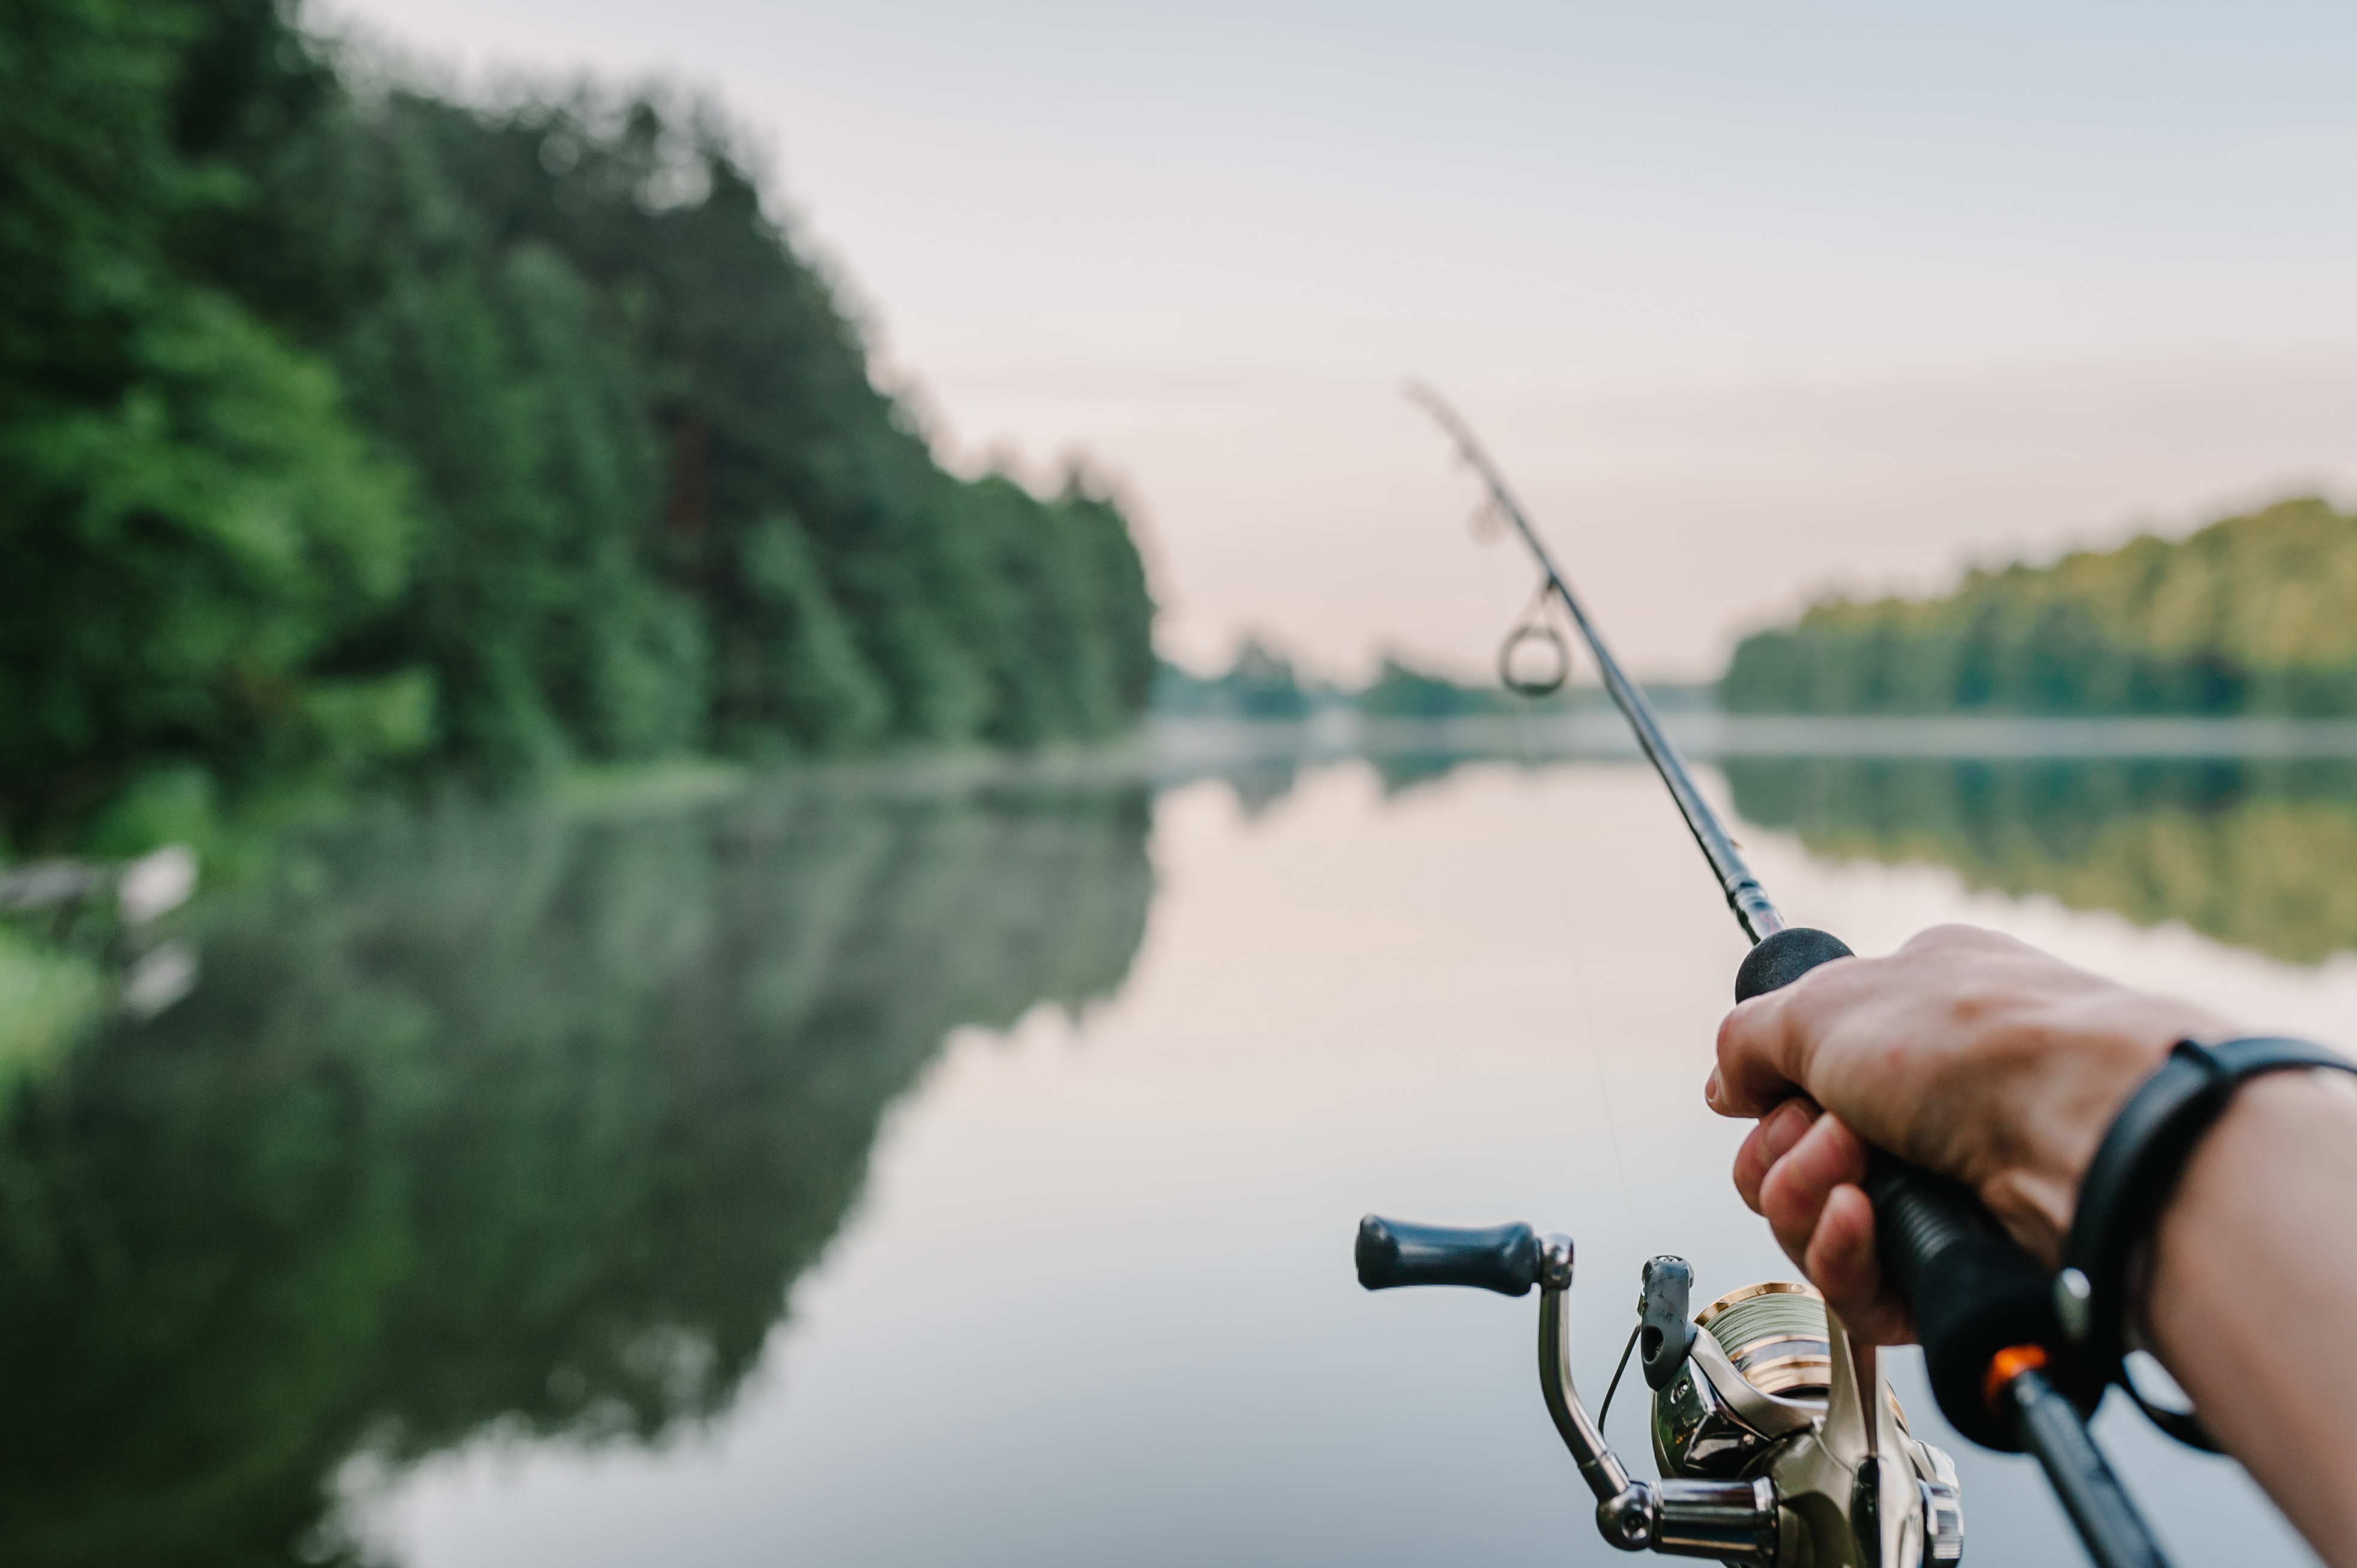 Close-up of a hand holding a fishing rod over the water, bass fishing concept. 